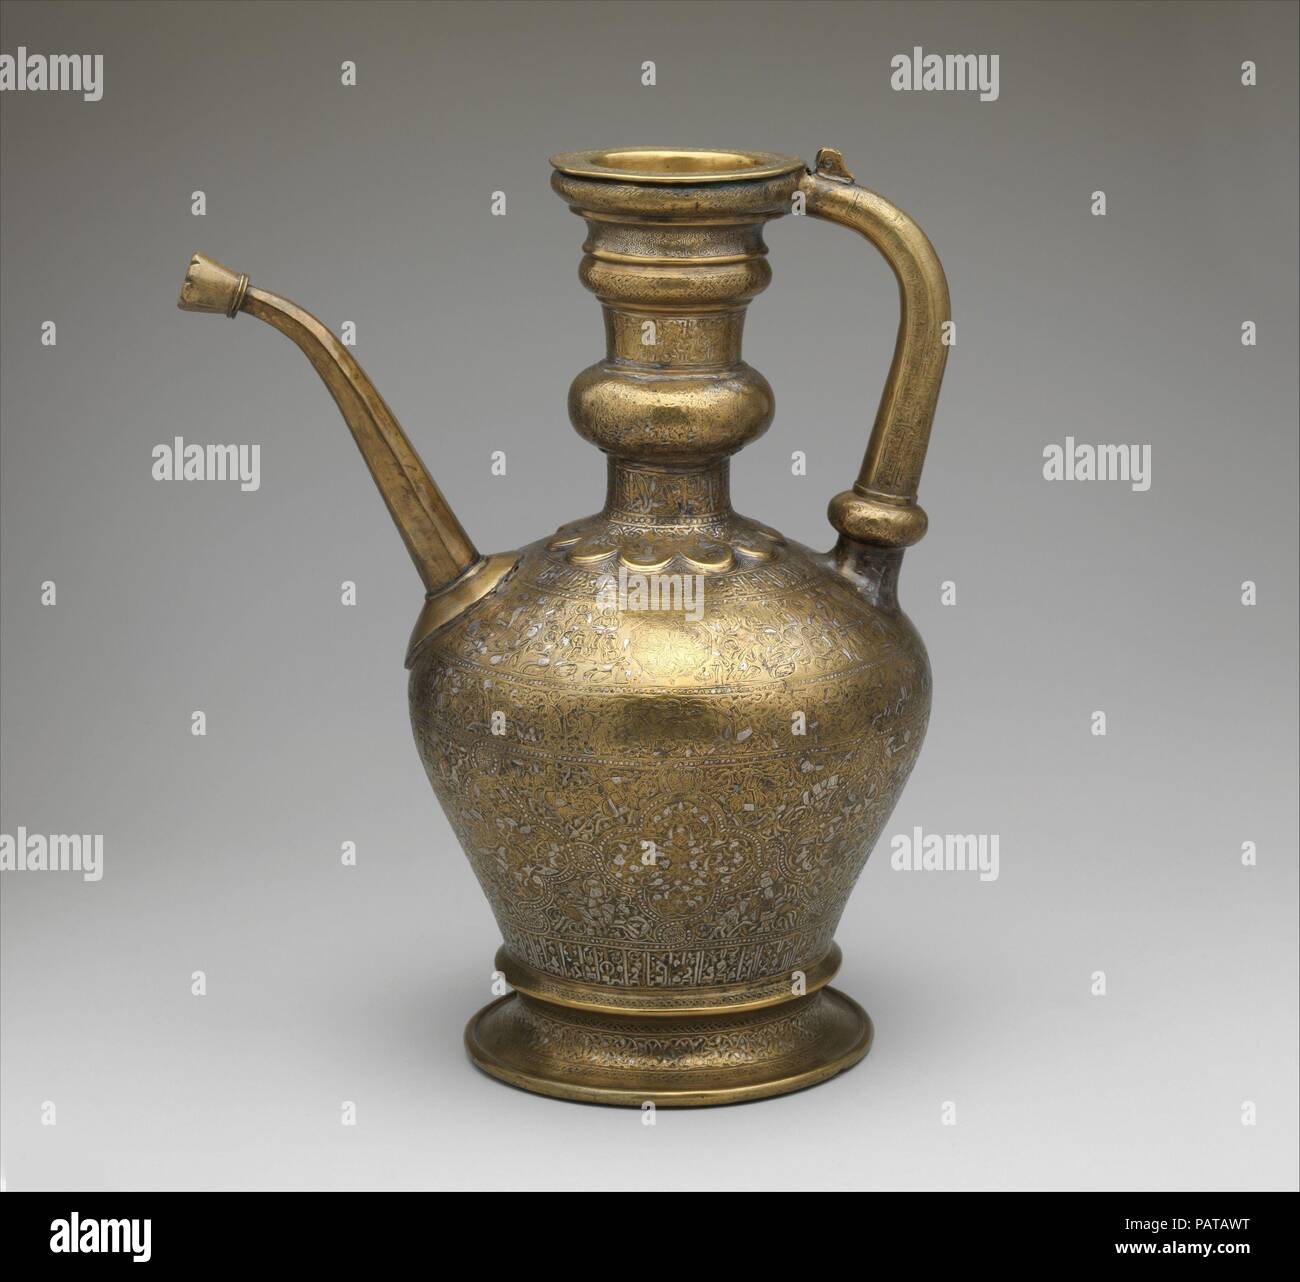 Ewer with Inscription, Horsemen, and Vegetal Decoration. Dimensions: H. 14 1/2 in. (36.8 cm)  W. 12 1/16 in. (30.6 cm)  Diam. 8 3/8 in. (21.3 cm). Maker: `Umar ibn al-Hajji Jaldak. Date: dated A.H. 623/ A.D. 1226.  This lavishly decorated object is inscribed around the neck: 'Made by 'Umar ibn al-Hajji Jaldak, the apprentice of Ahmad al-Dhaki al-Naqqash al-Mawsili in the year 623 [1226 A.D.].' Ahmad al-Mawsili, originally from Mosul in Upper Mesopotamia, was a famous metalworker who had a number of pupils. Museum: Metropolitan Museum of Art, New York, USA. Stock Photo